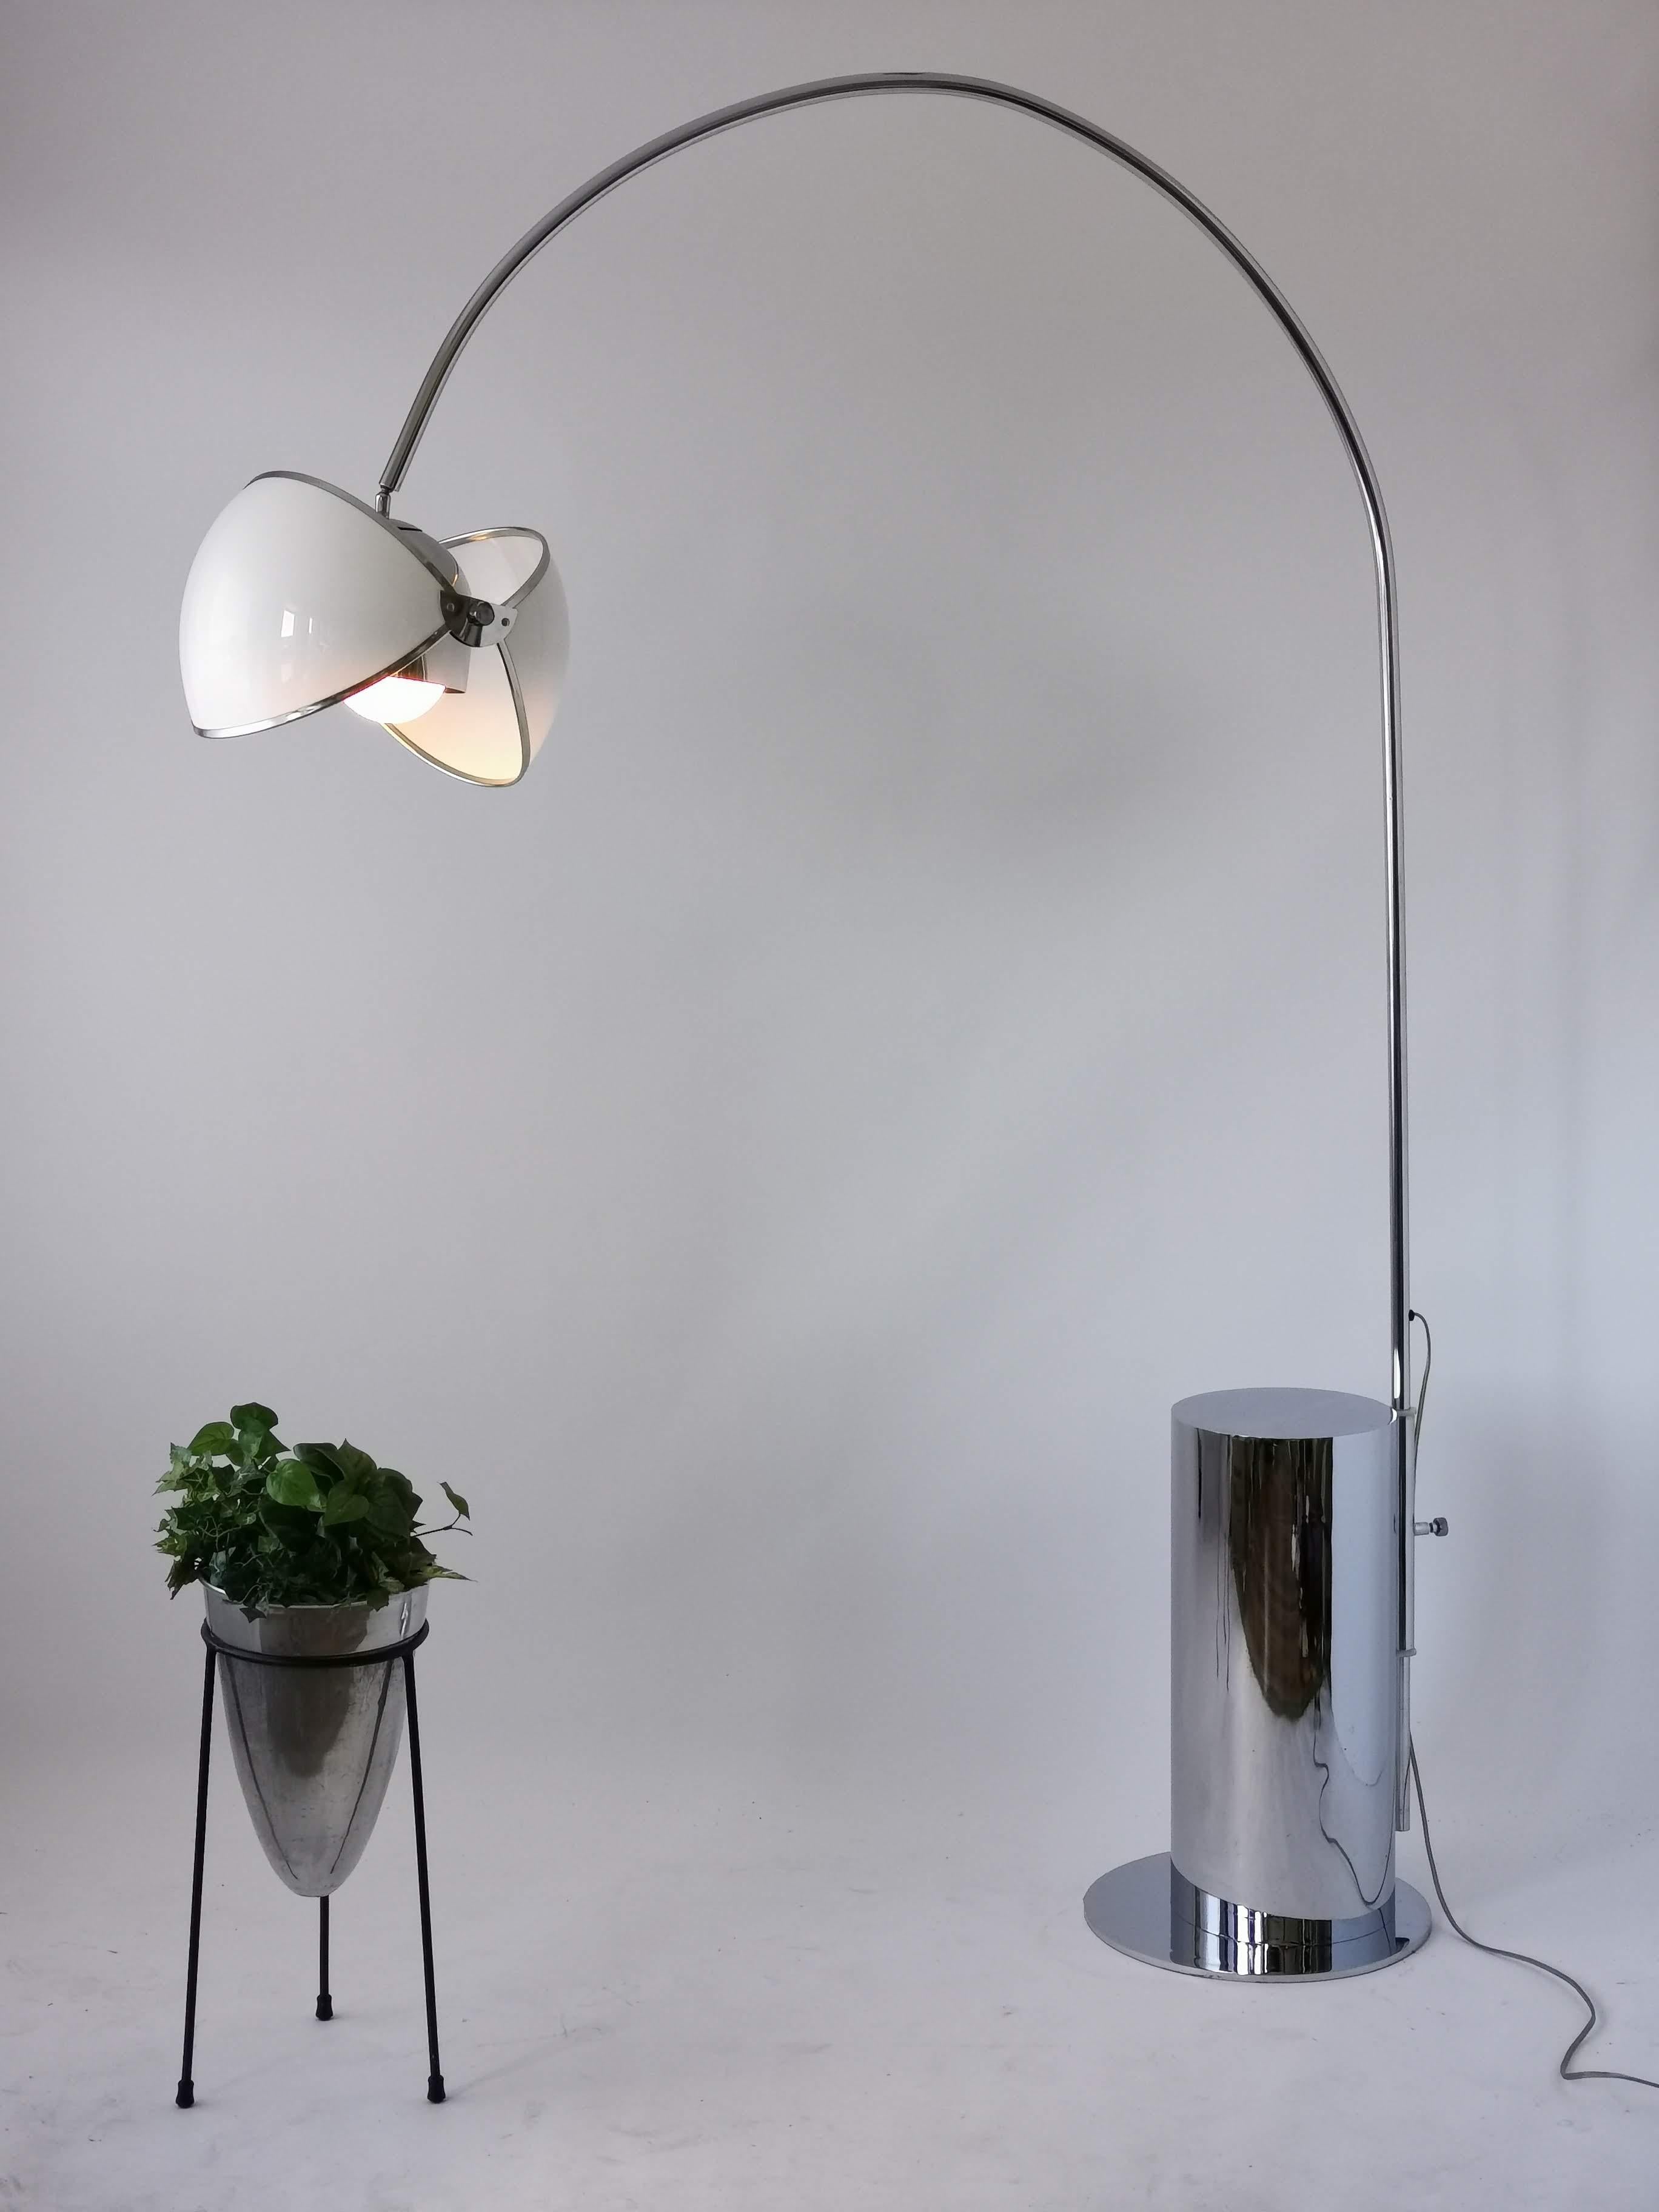 Rare arch floor lamp in the style of Superstudio Olook lamp, featuring a bold jaw like action adjustable acrylic shade.

Head swivel in different direction 

Solid well-made construction.

Huge, heavy chrome base with sturdy height ajustment